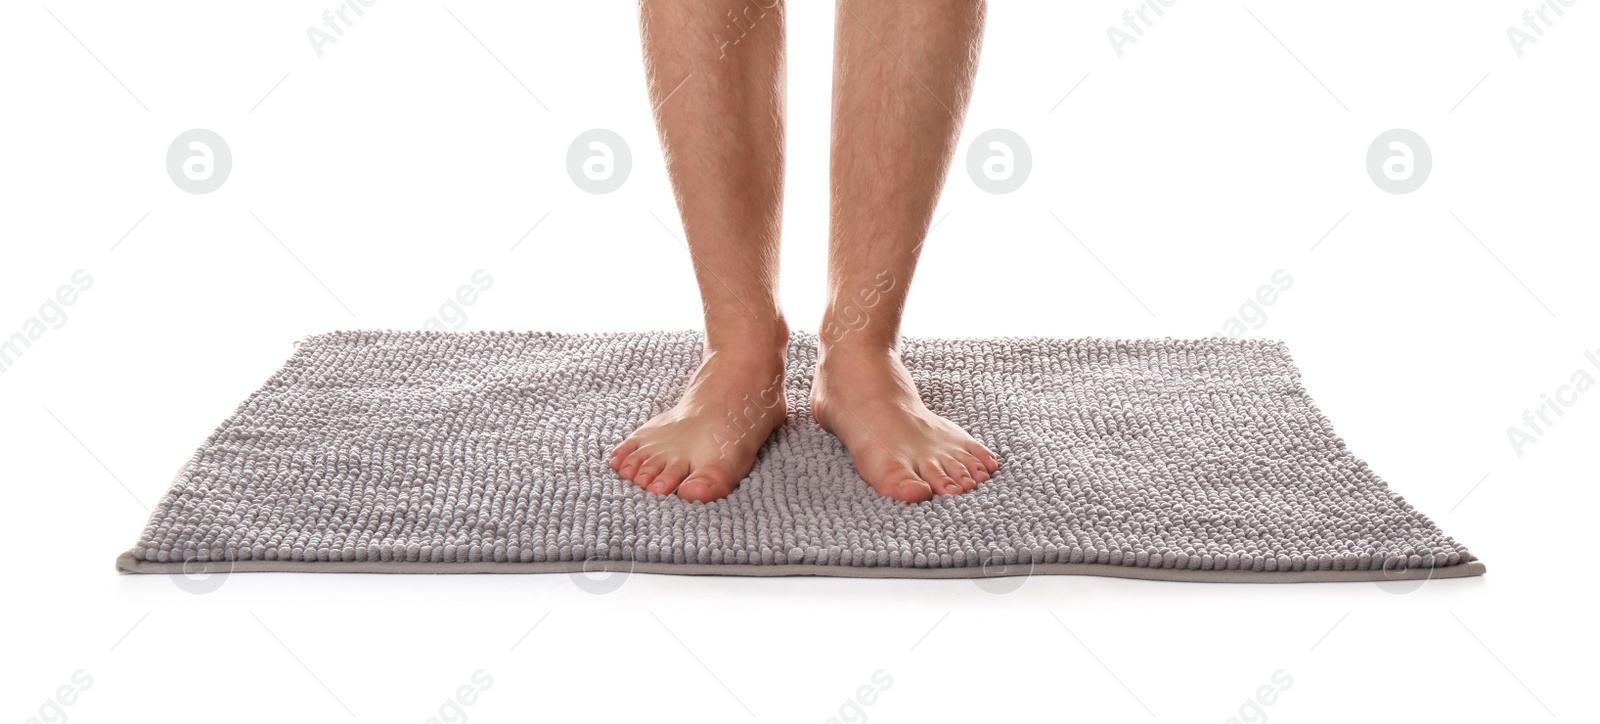 Photo of Man standing on soft grey bath mat against white background, closeup